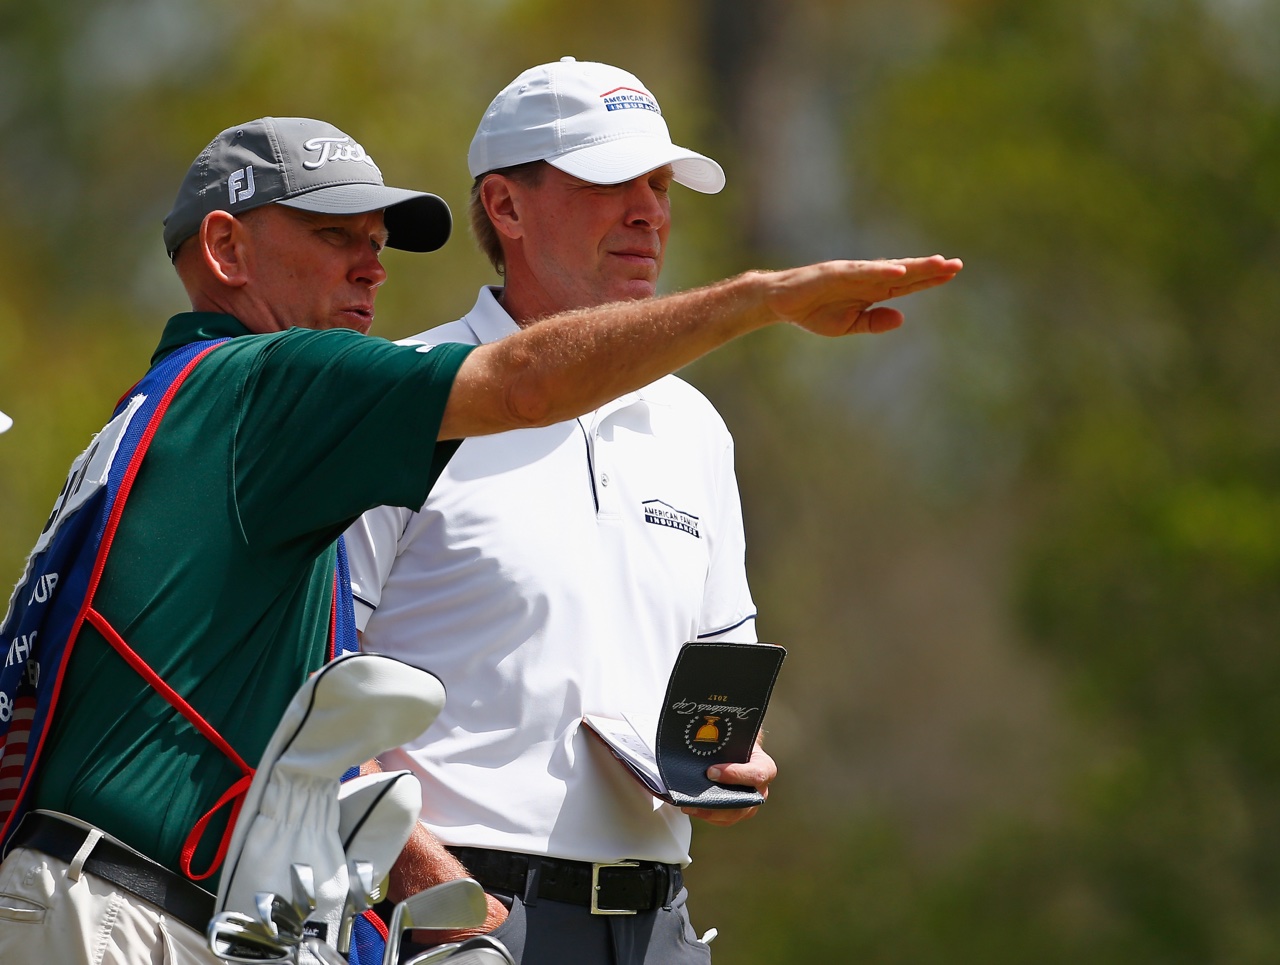 Steve Stricker’s caddie discusses course strategy